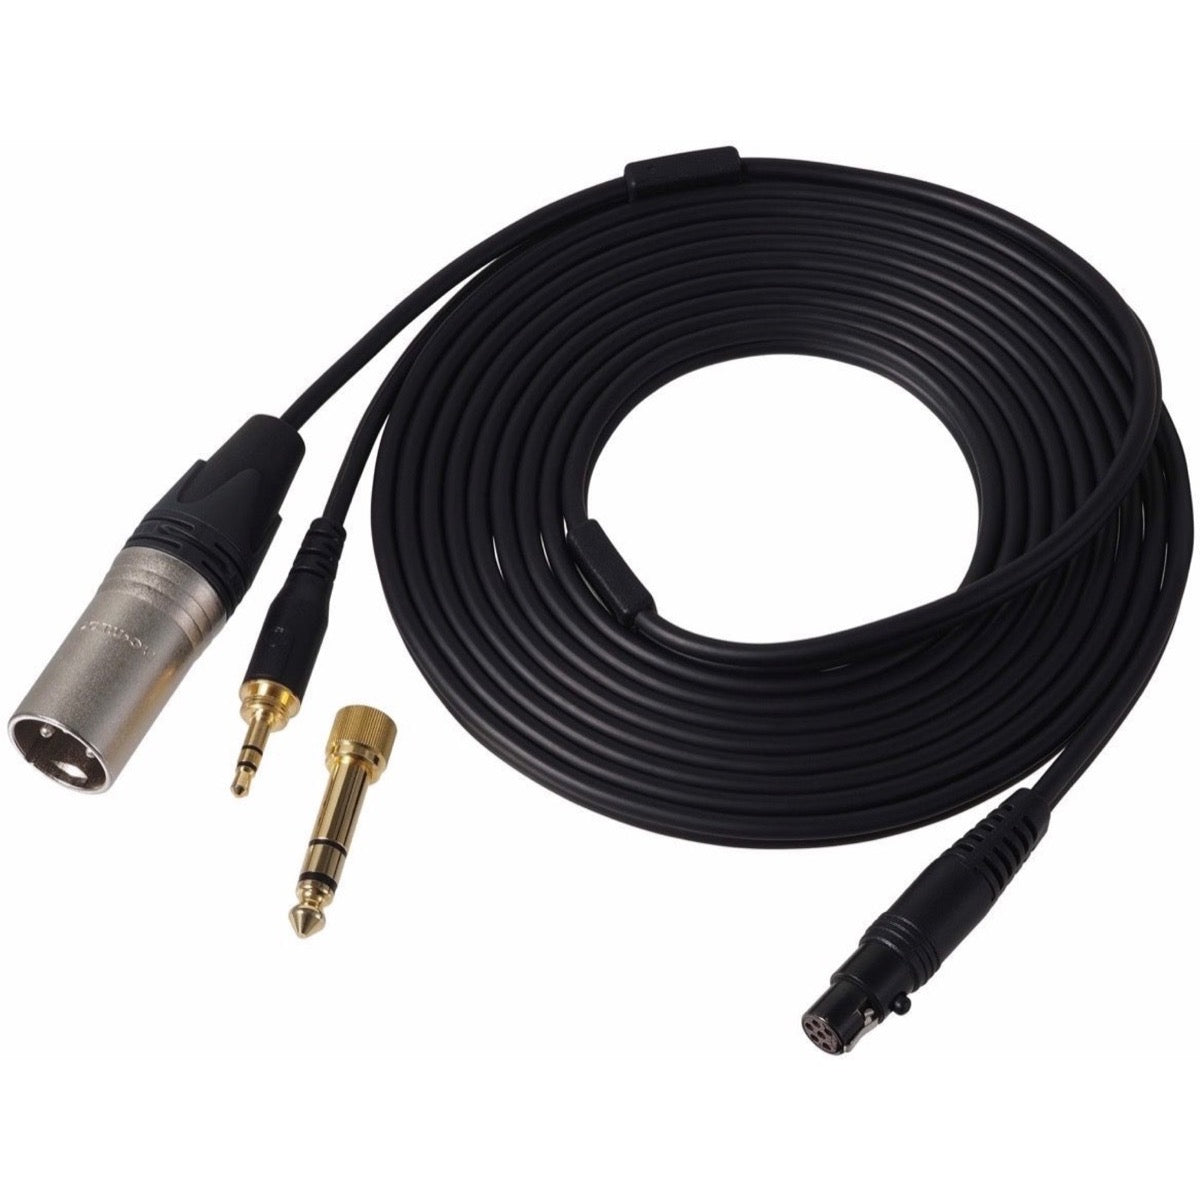 Audio-Technica BPCB2 Replacement Cable for BPHS2 Headset, with XLR and TRS connectors